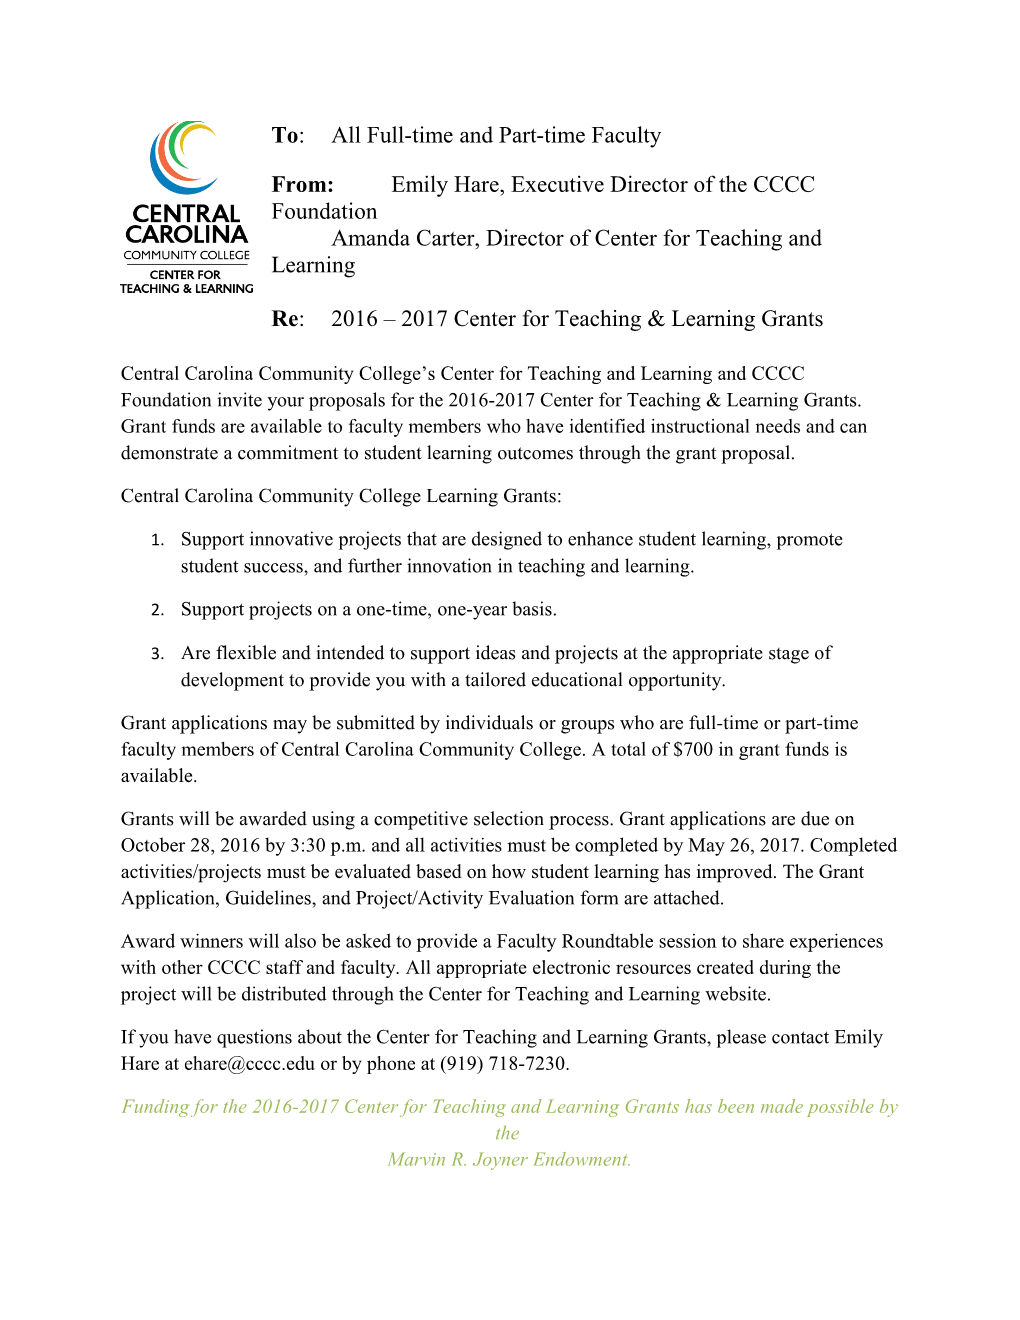 Central Carolina Community College Learning Grants